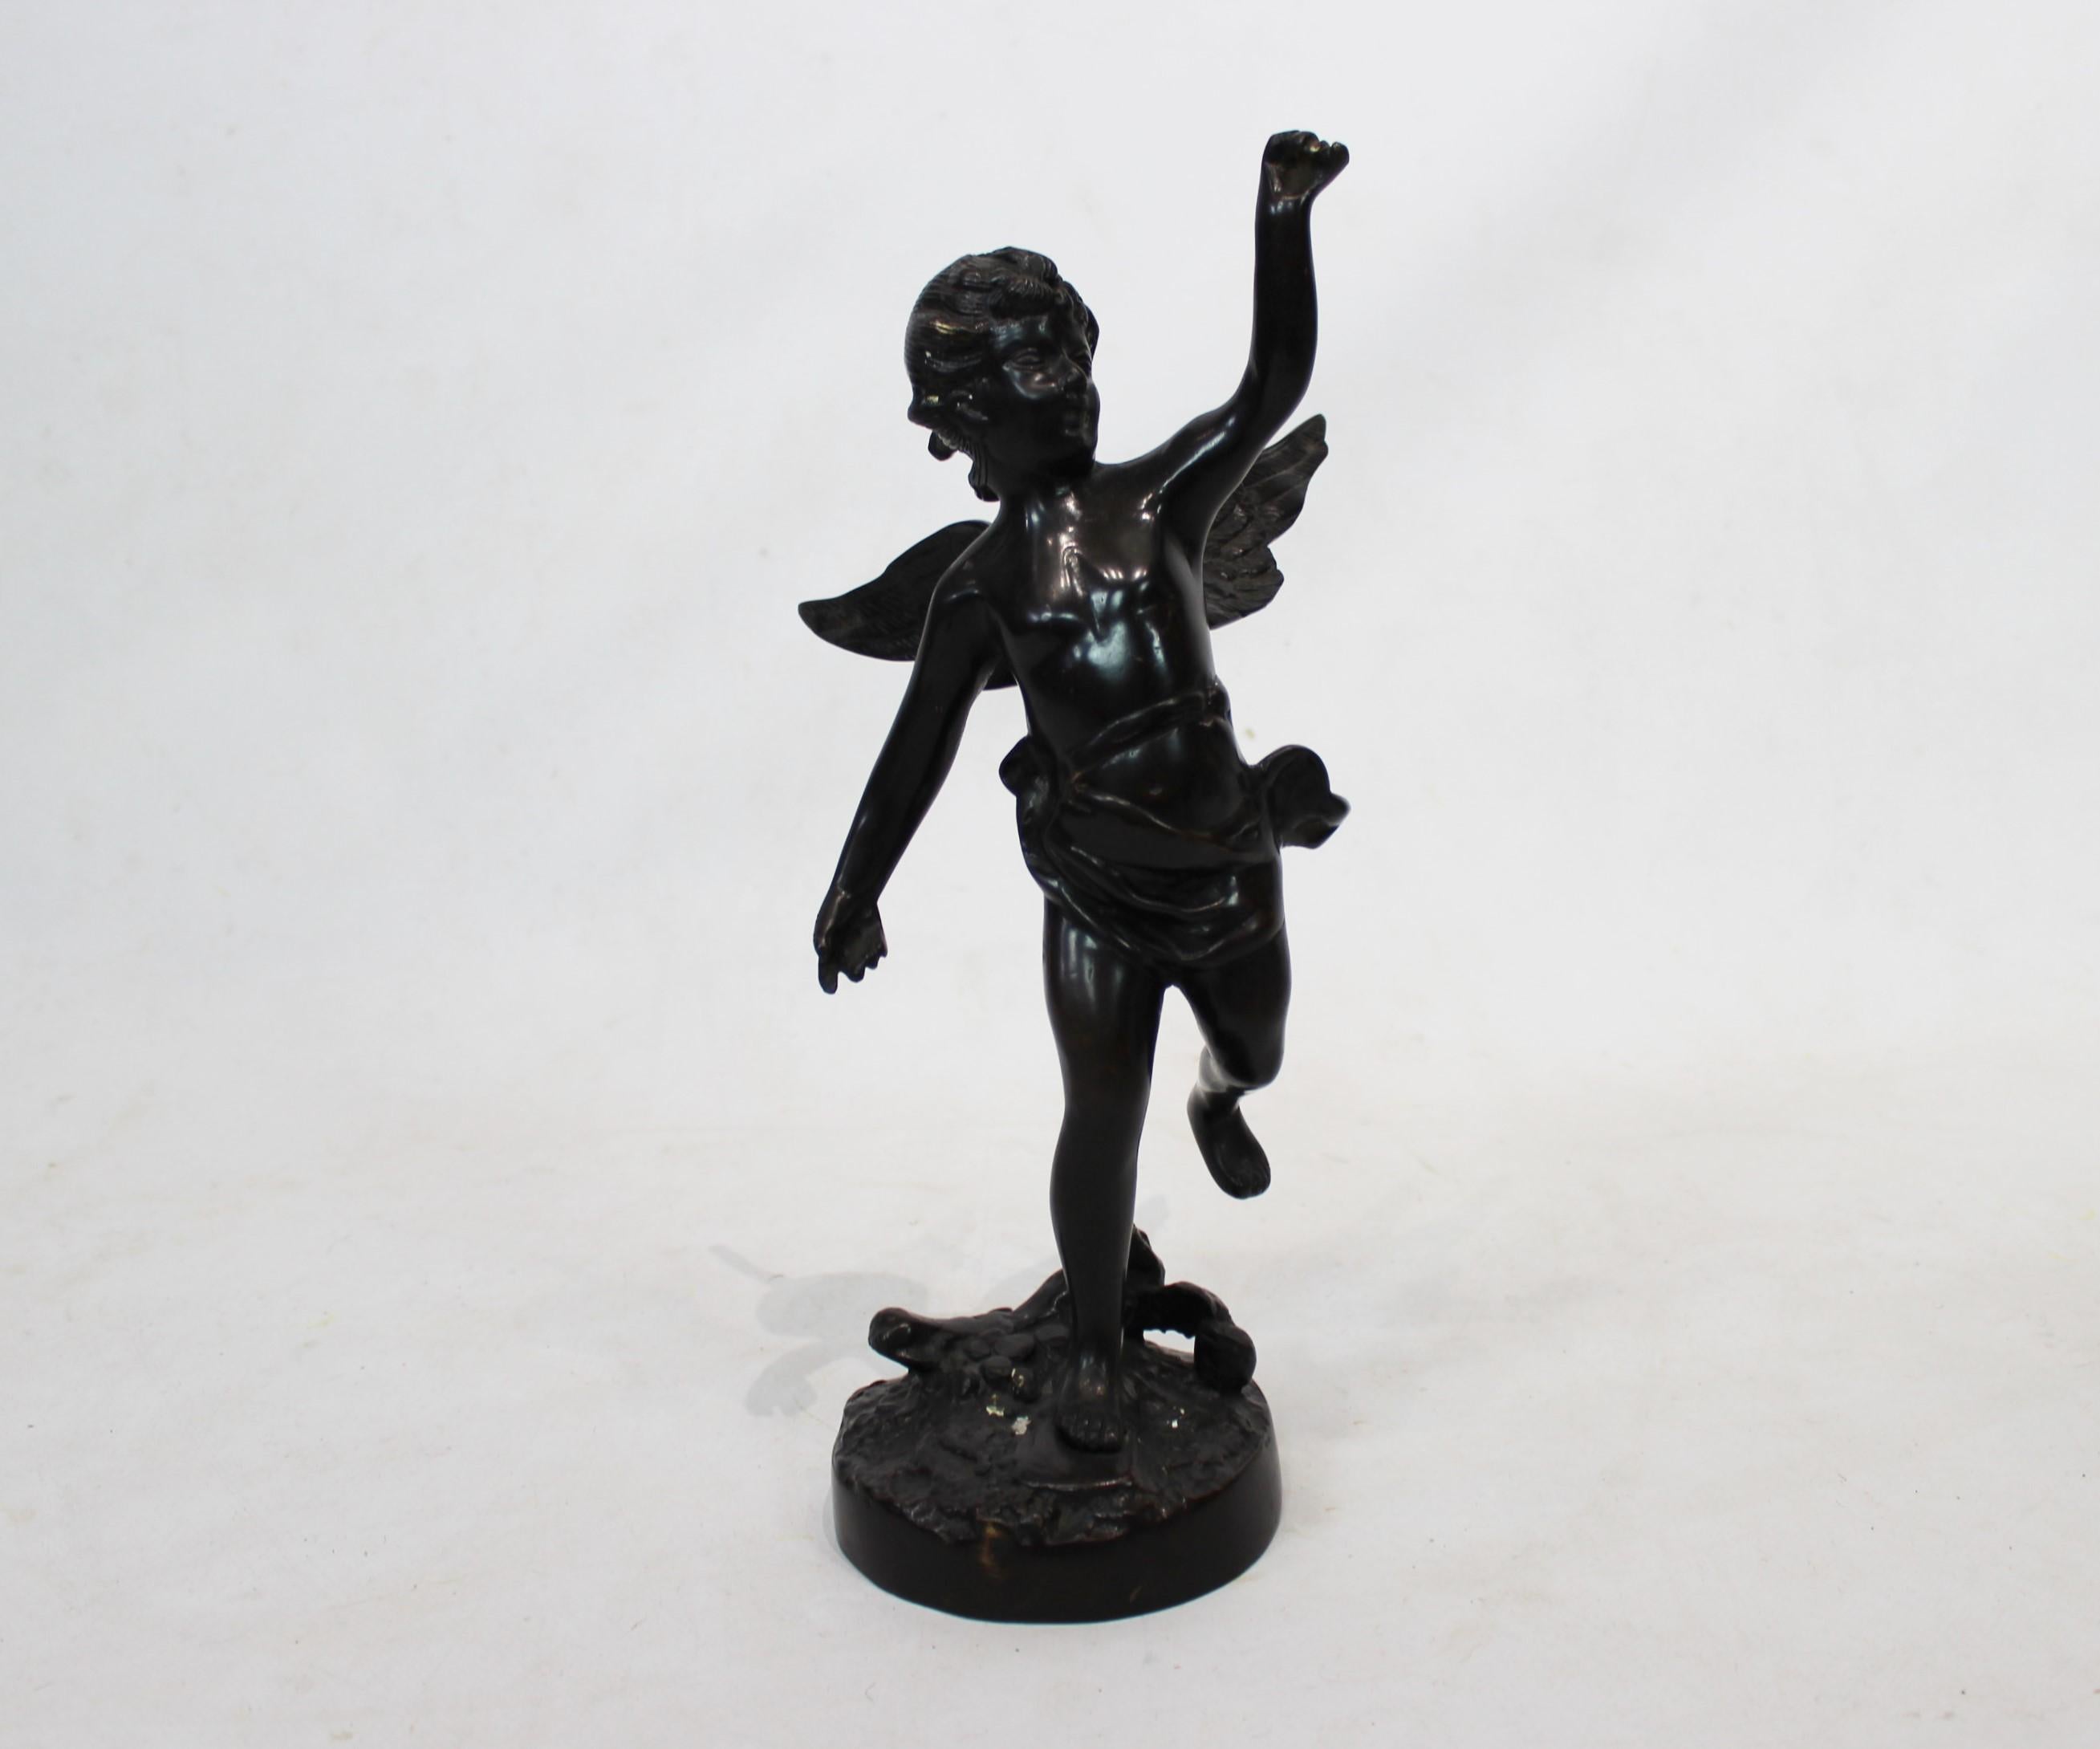 Italian sculpture of angelic motif in patinated bronze from the 1930s. The figure is in great vintage condition.
Measures: H 35 cm and D 13 cm.